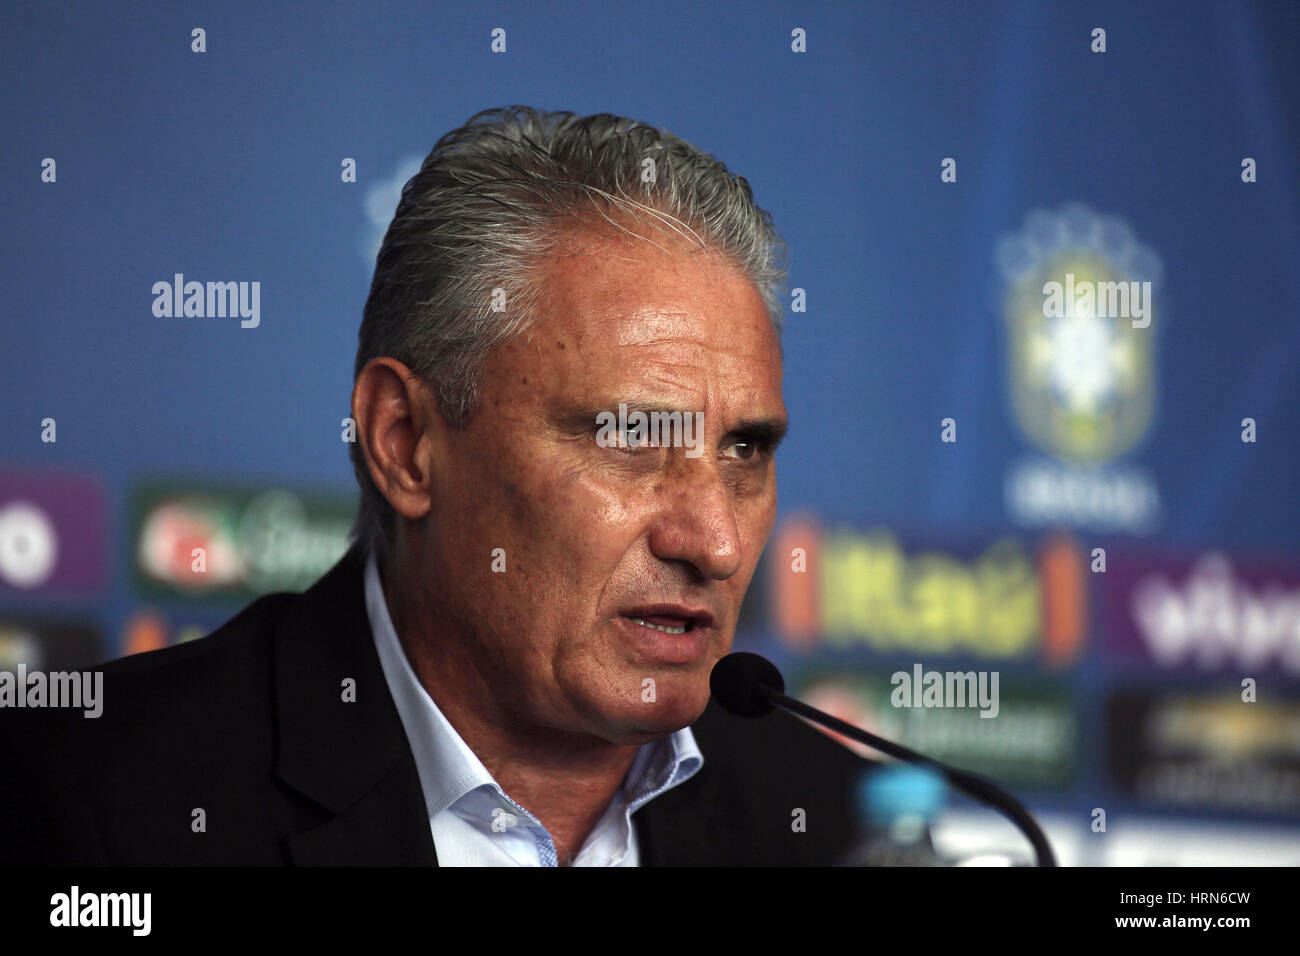 (170304) -- SAO PAULO, March 4, 2017 (Xinhua) -- The head coach of the Brazilian national soccer team, Adenor Leonardo Bacchi 'Tite', takes part in a press conference at Congonhas Airport in Sao Paulo, Brazil, on March 3, 2017. According to the local press, Tite announced on Friday the list of Brazil's national soccer team's players called for the matches against Uruguay on March 23 in Montevideo, and against Paraguay on March 28 in Sao Paulo, for the South American Soccer Confederation (CONMEBOL, for its acronym in Spanish) qualifying rounds for the Russia 2018 FIFA World Cup. (Xinhua/Rahel P Stock Photo